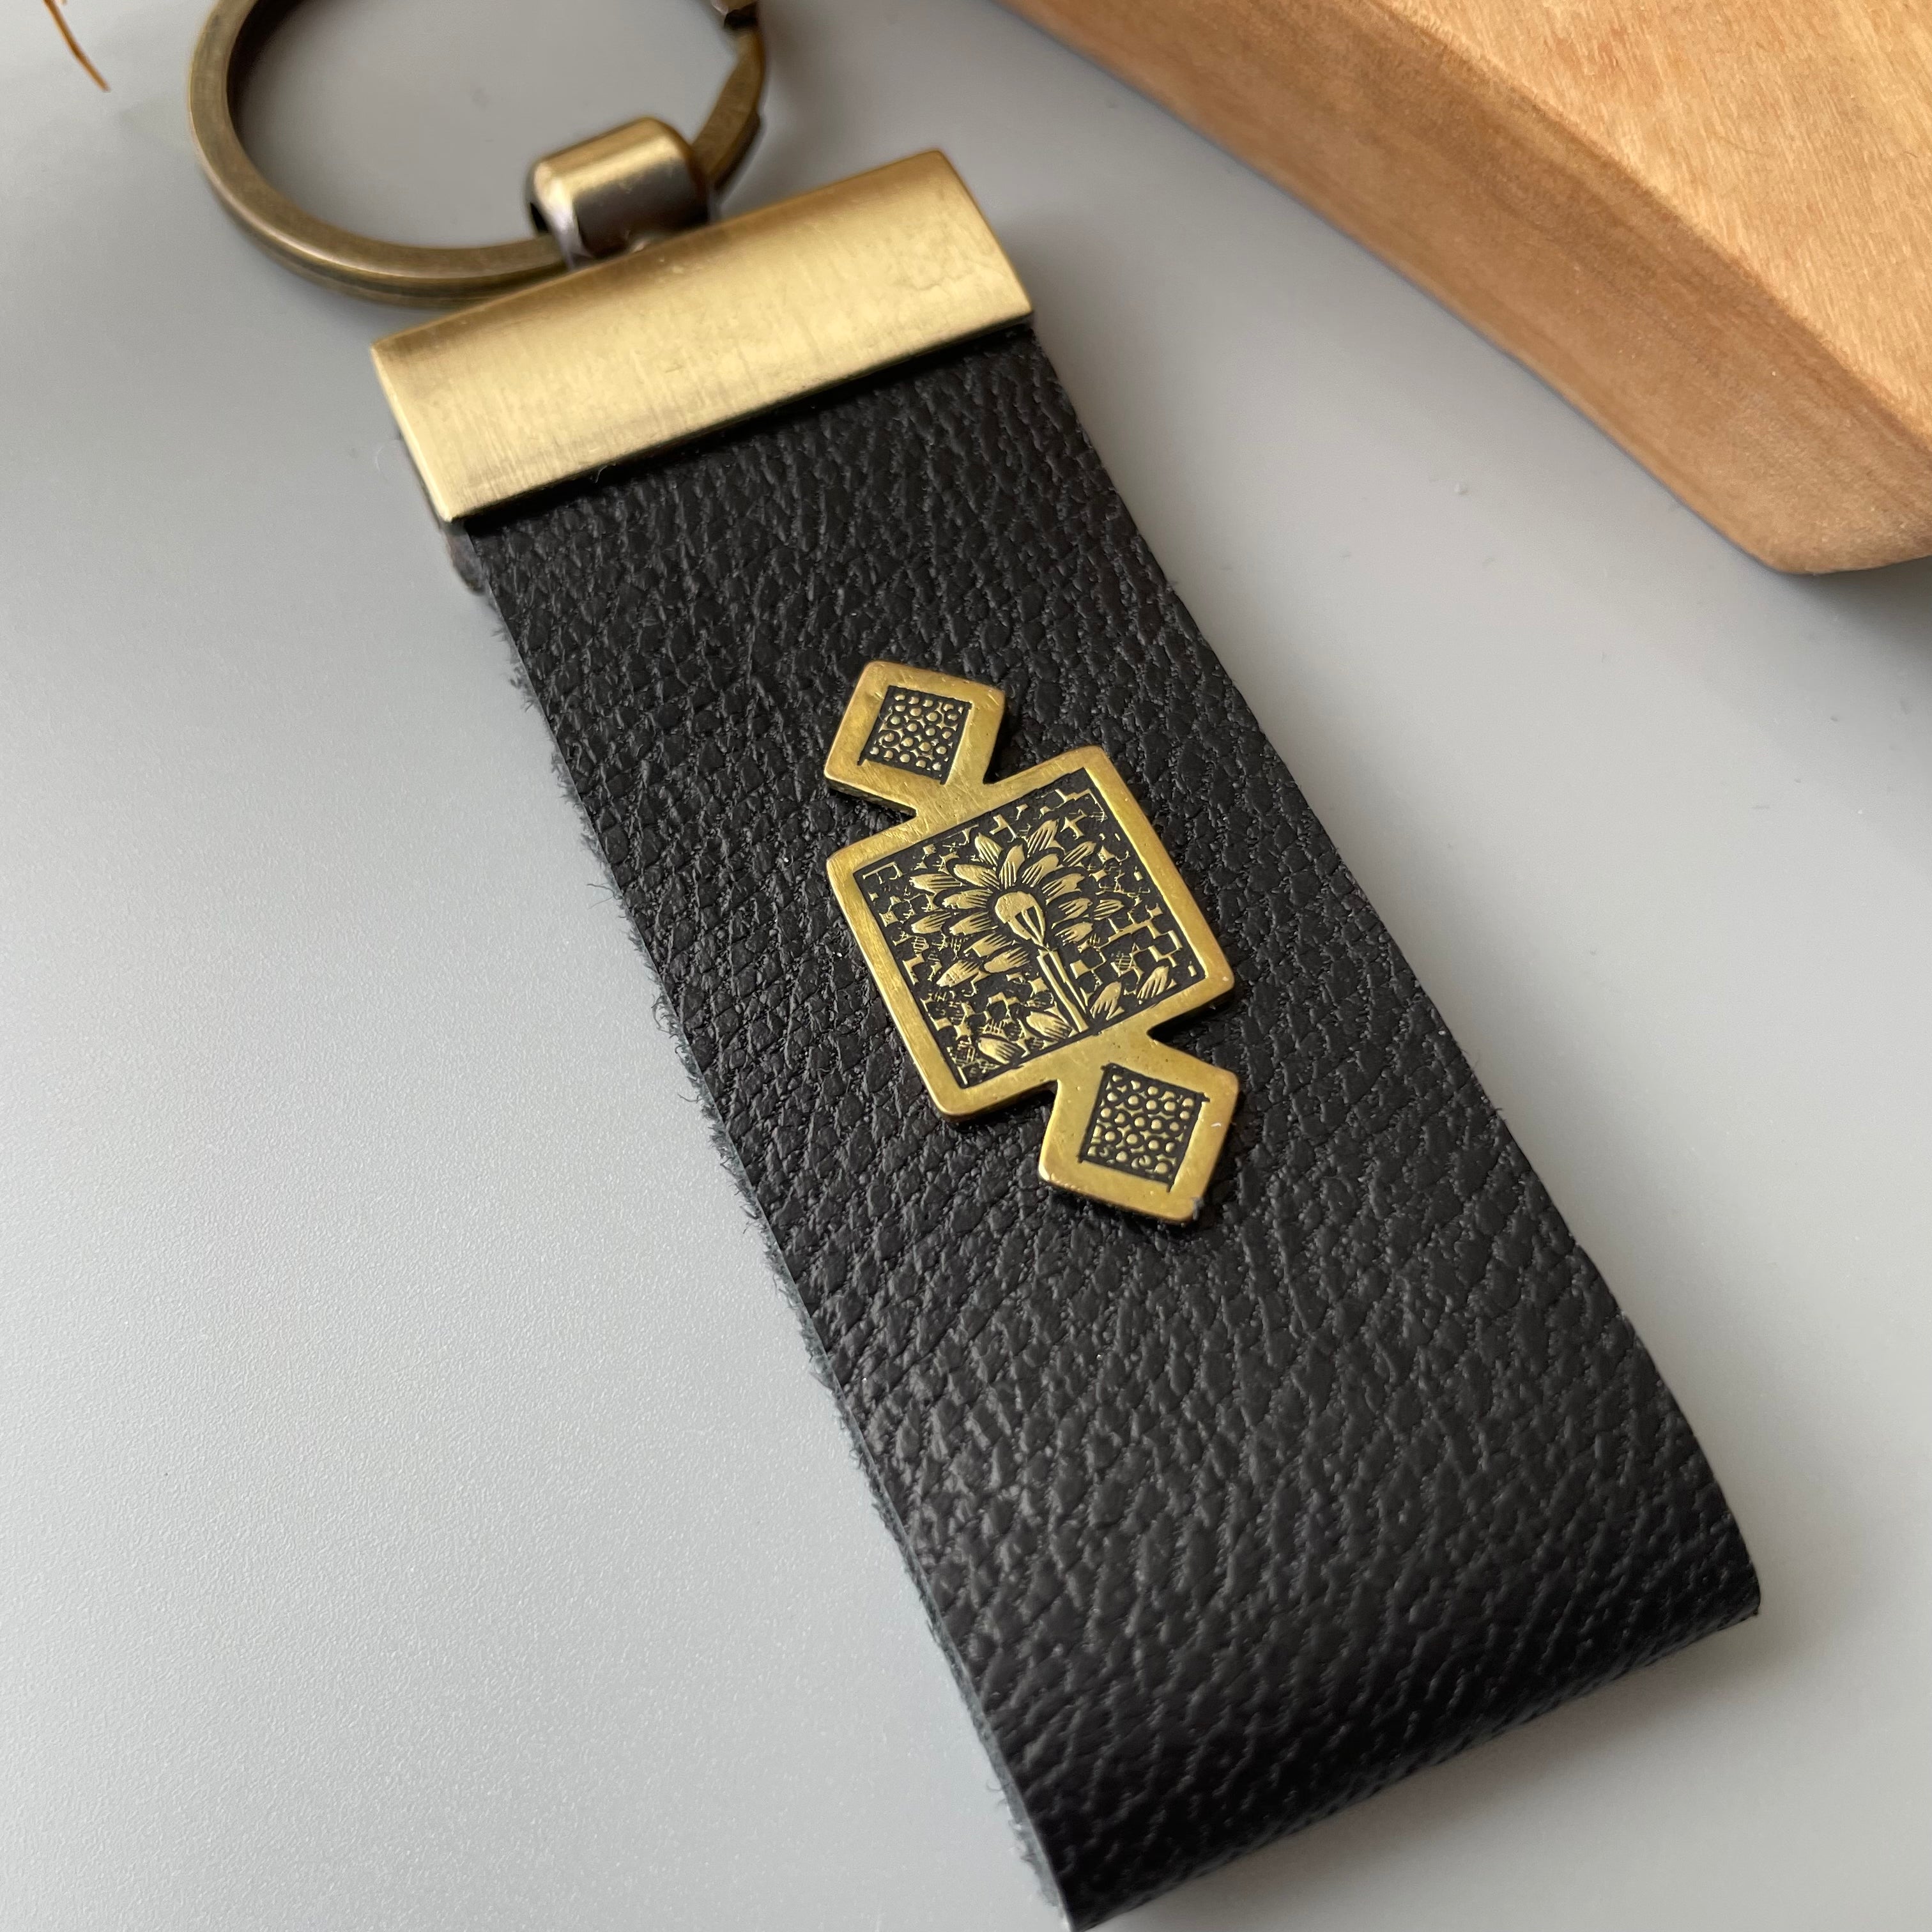 Handmade Leather and Engraved Brass Key Holder